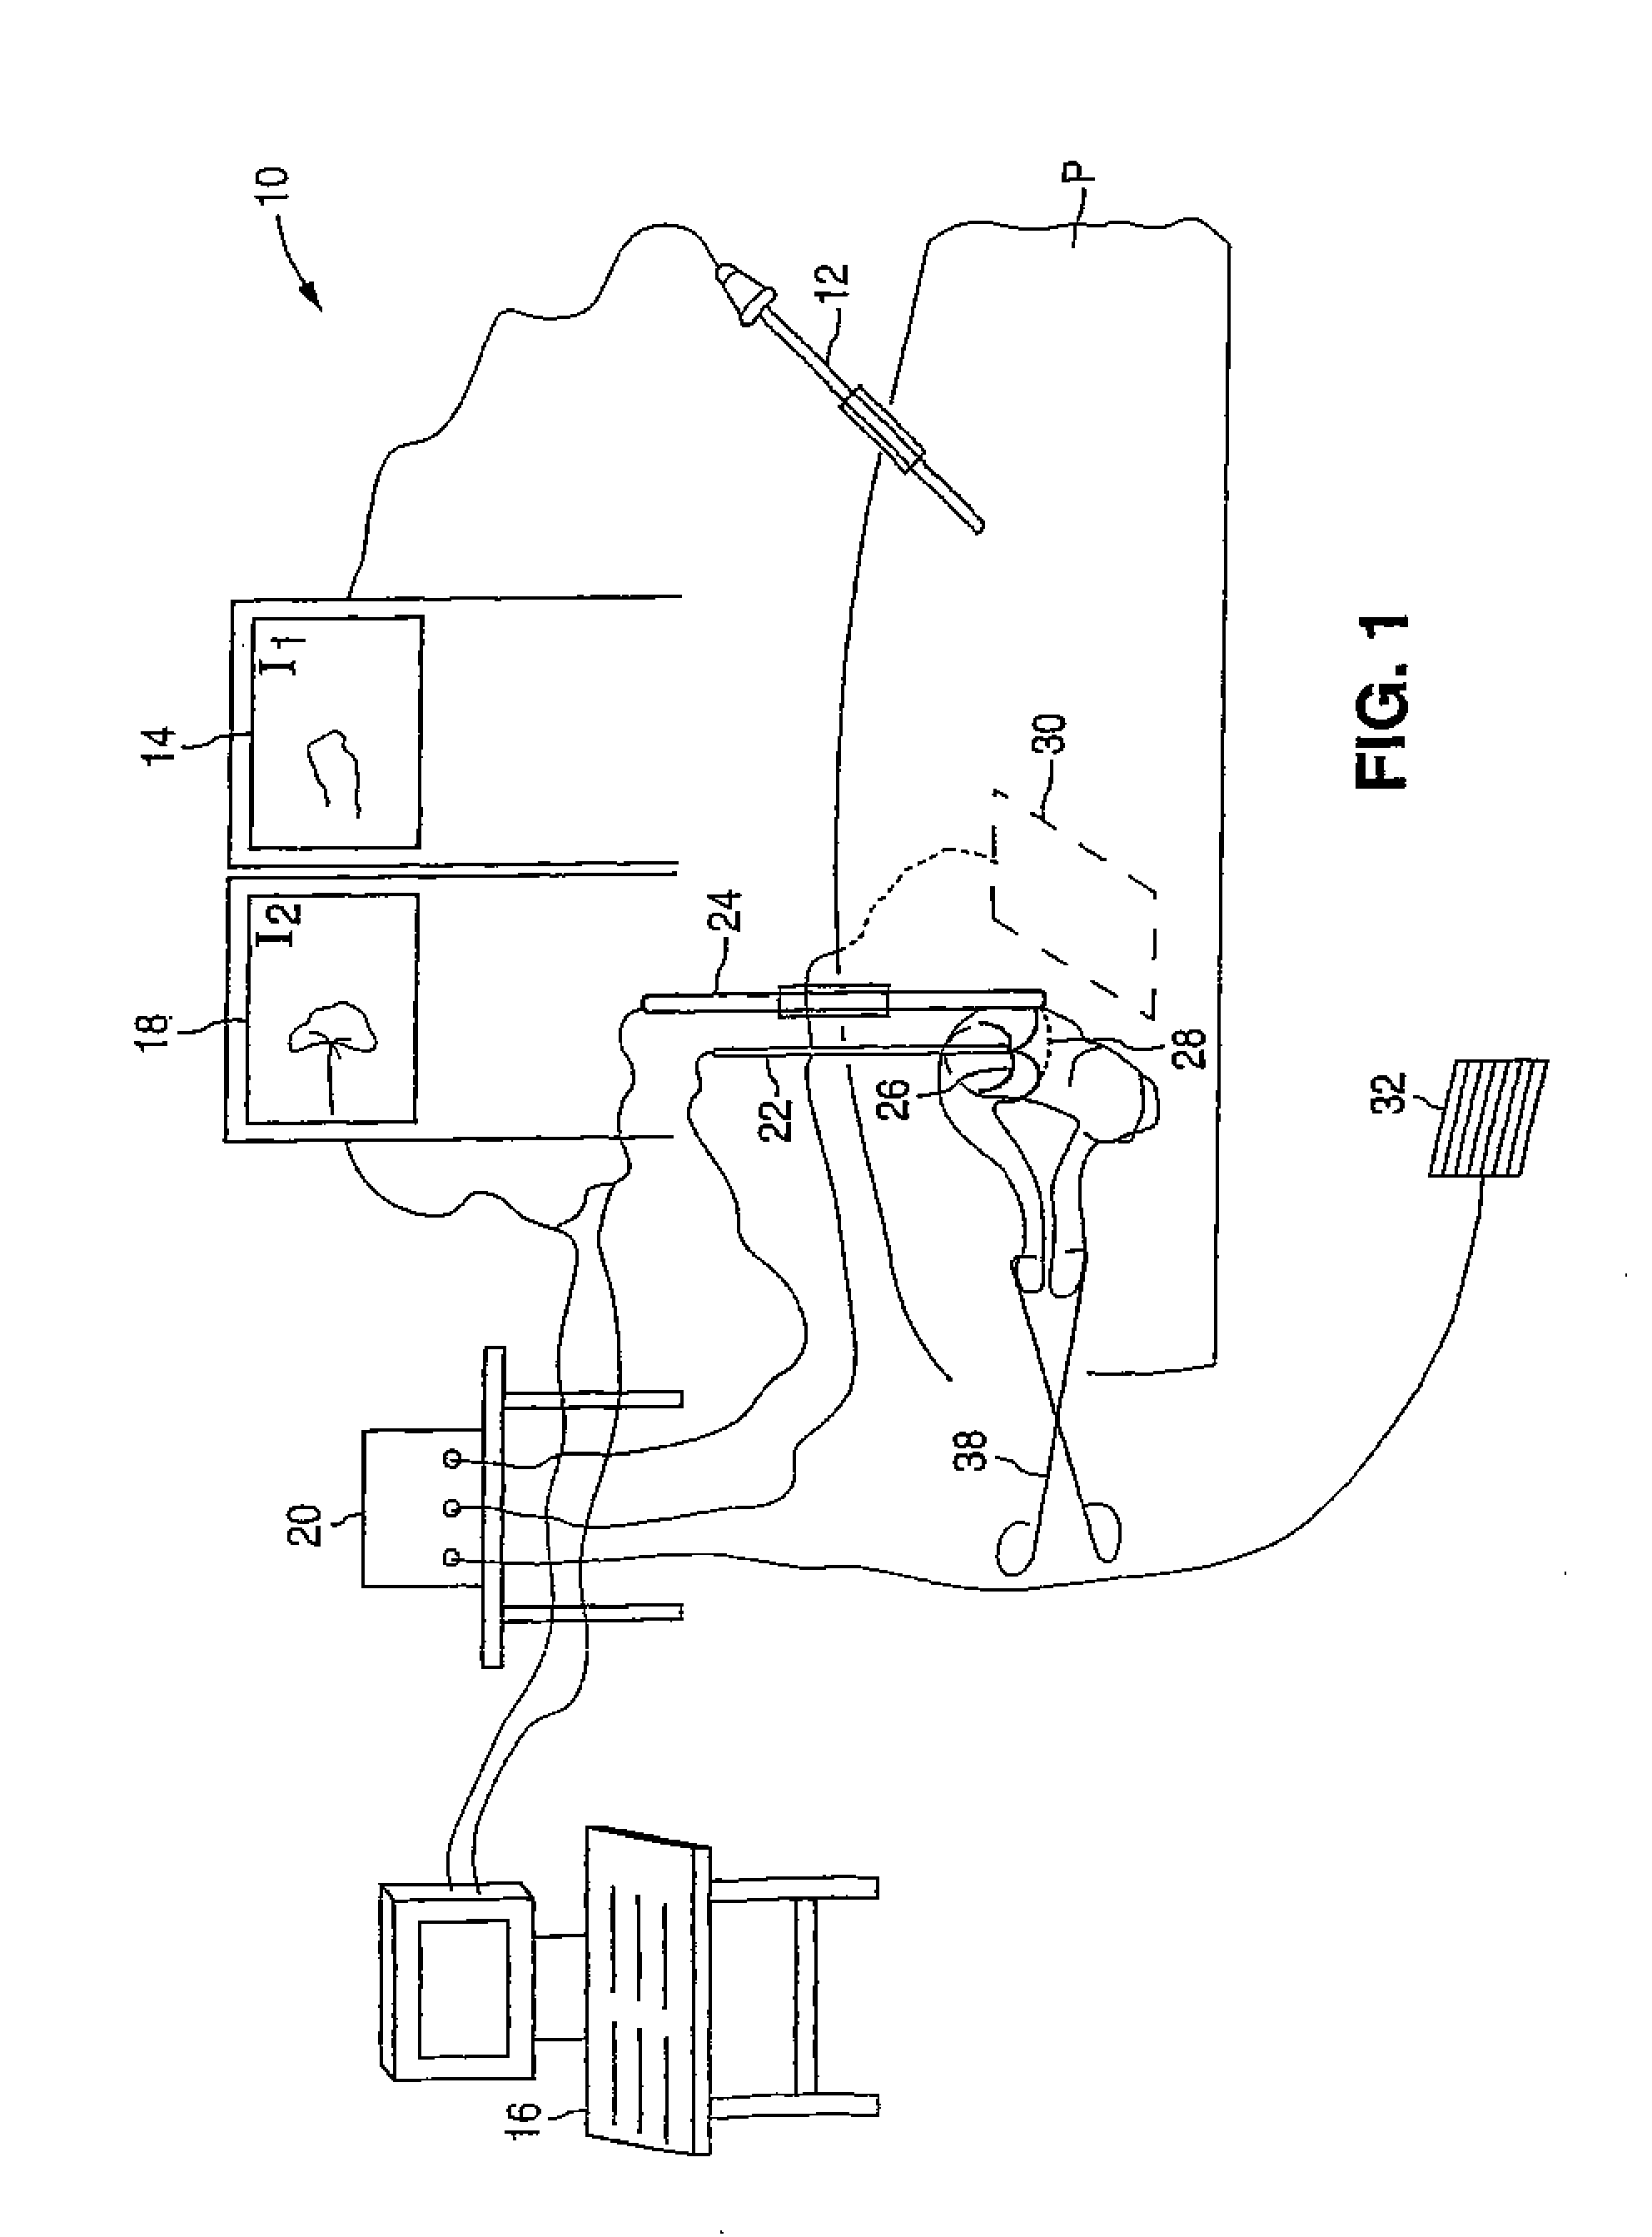 Gynecological ablation system with insufflation assisted imaging